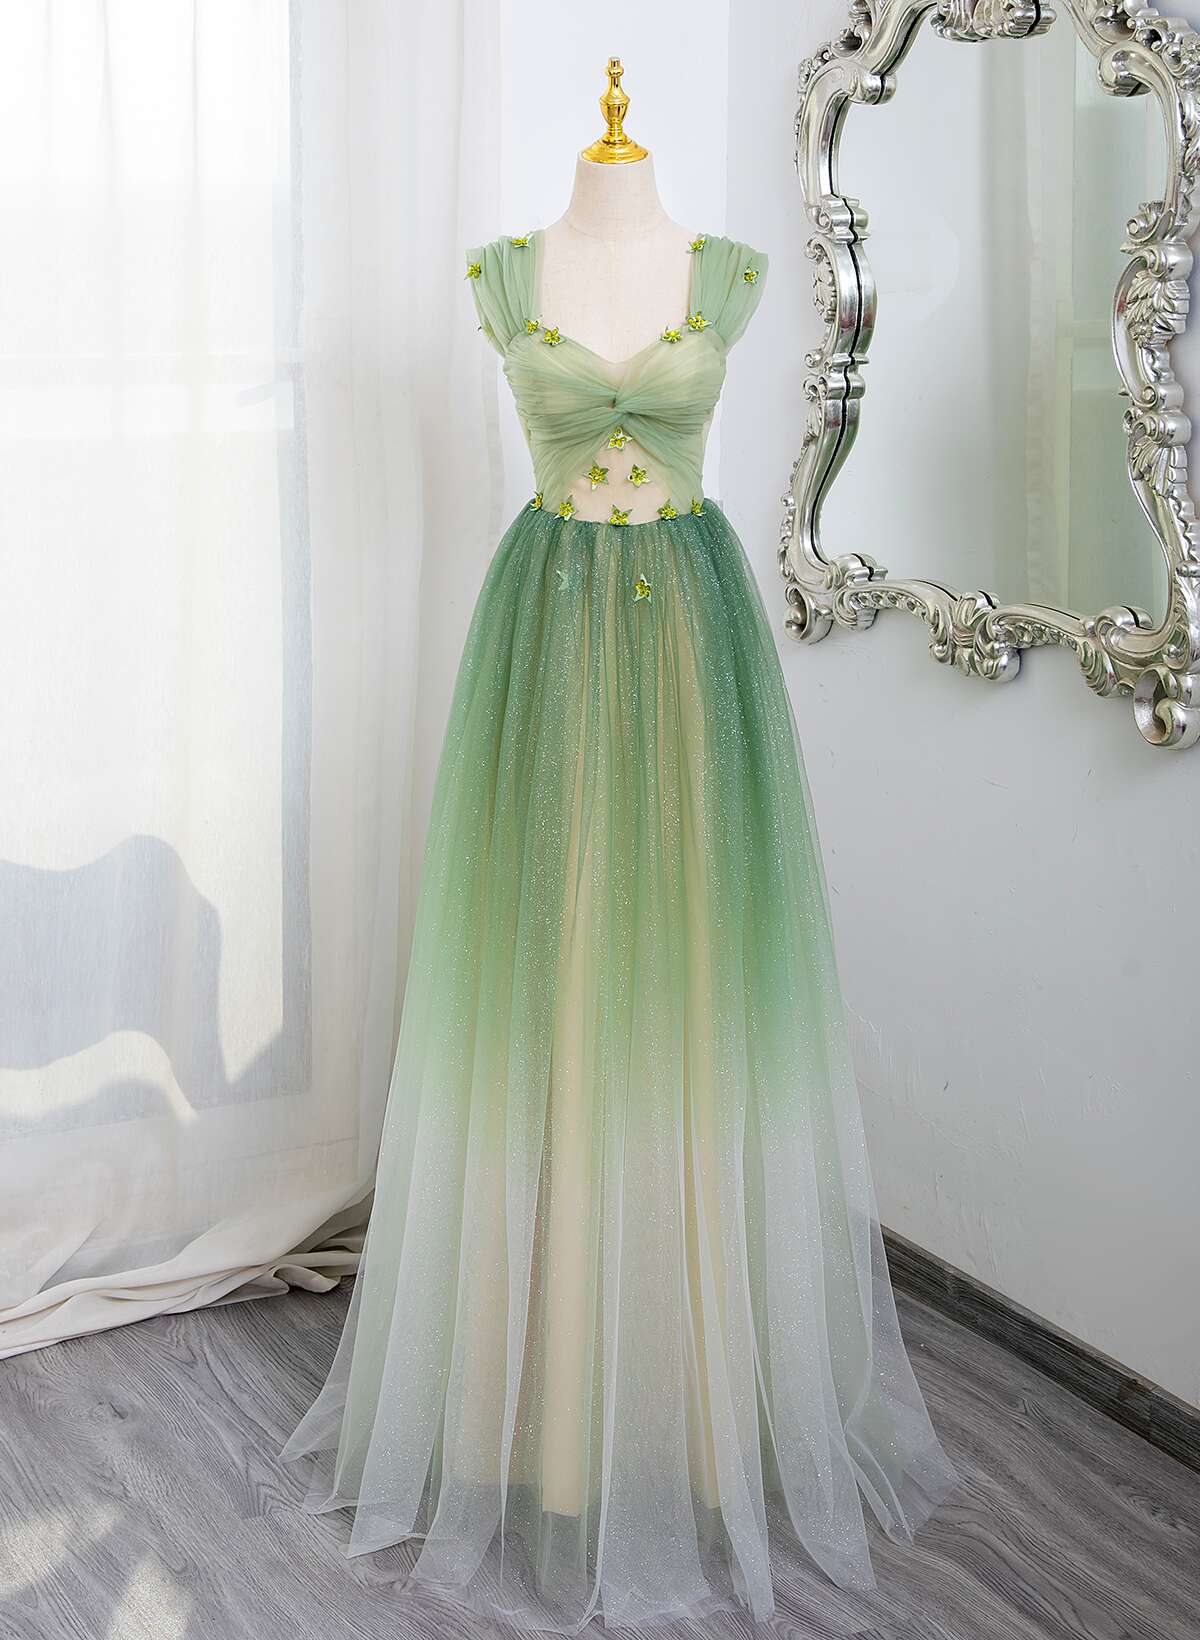 Green Tulle A-line Gradient Short Sleeves Prom Dress, Green Tulle Party Dress